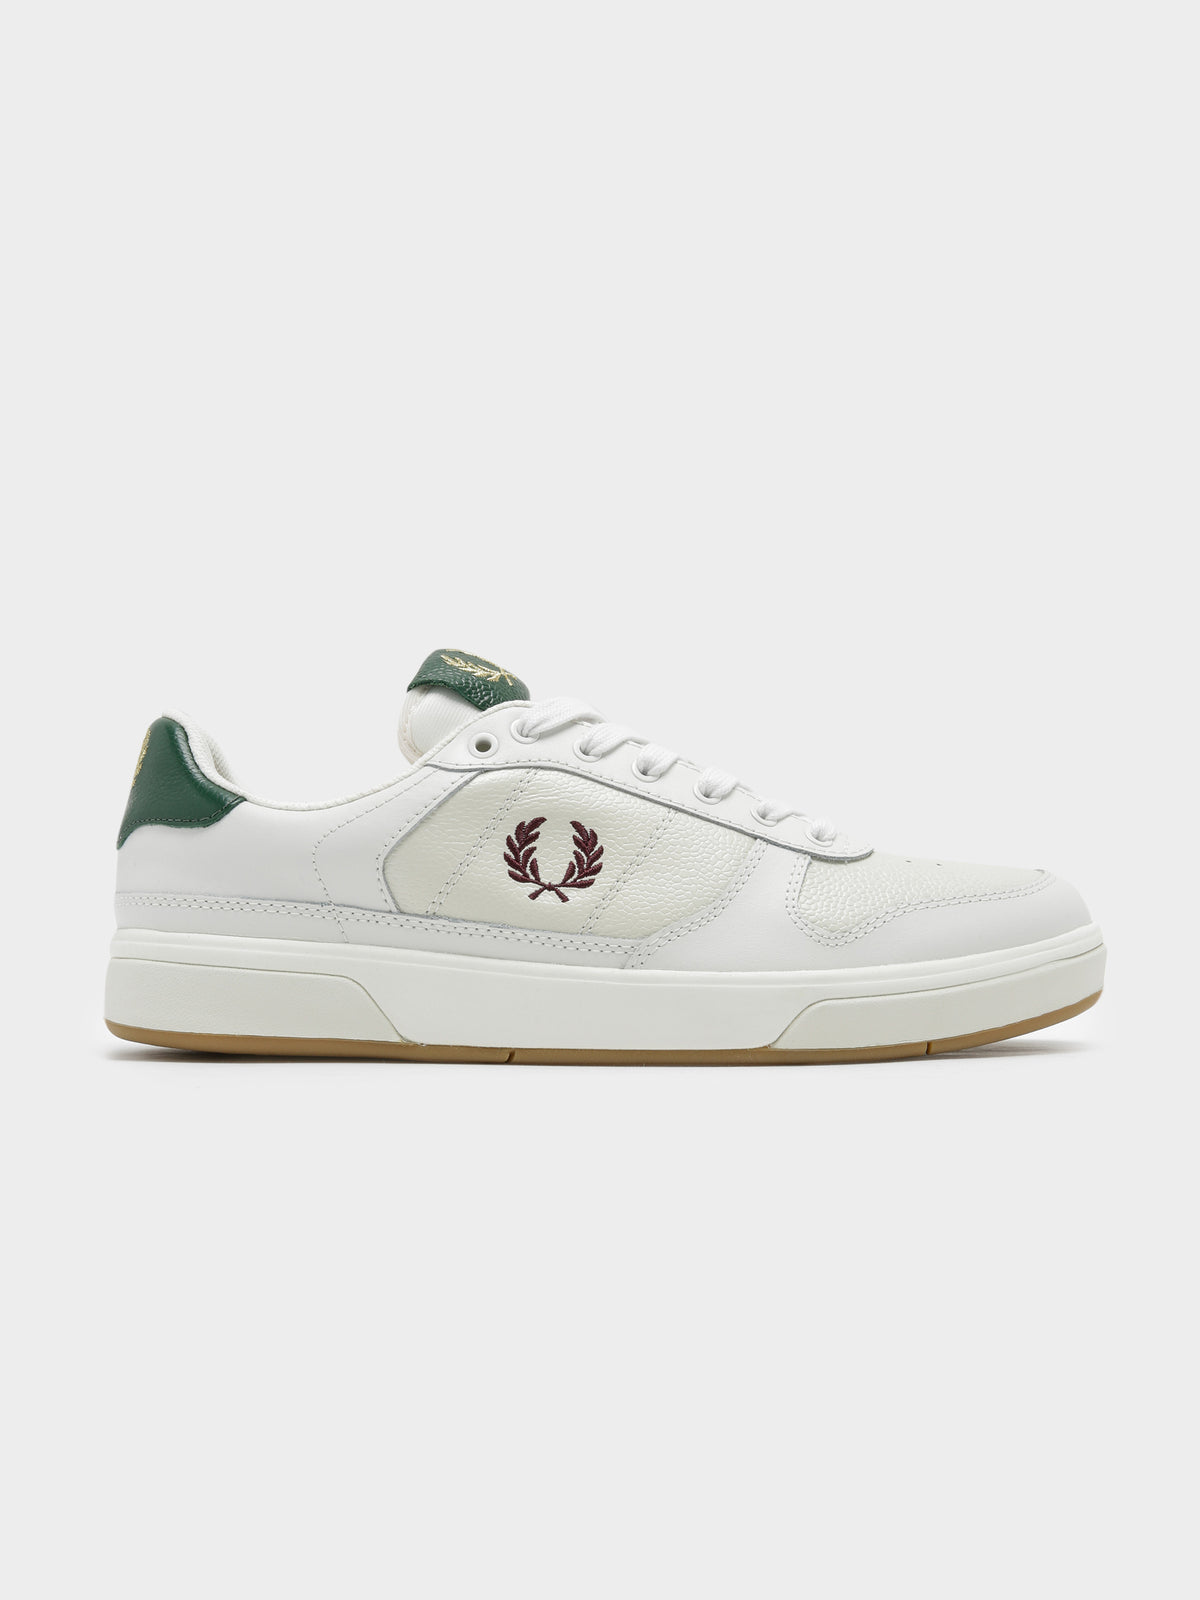 Mens B300 Scotch Grain Leather Sneakers in White, Green &amp; Burgundy